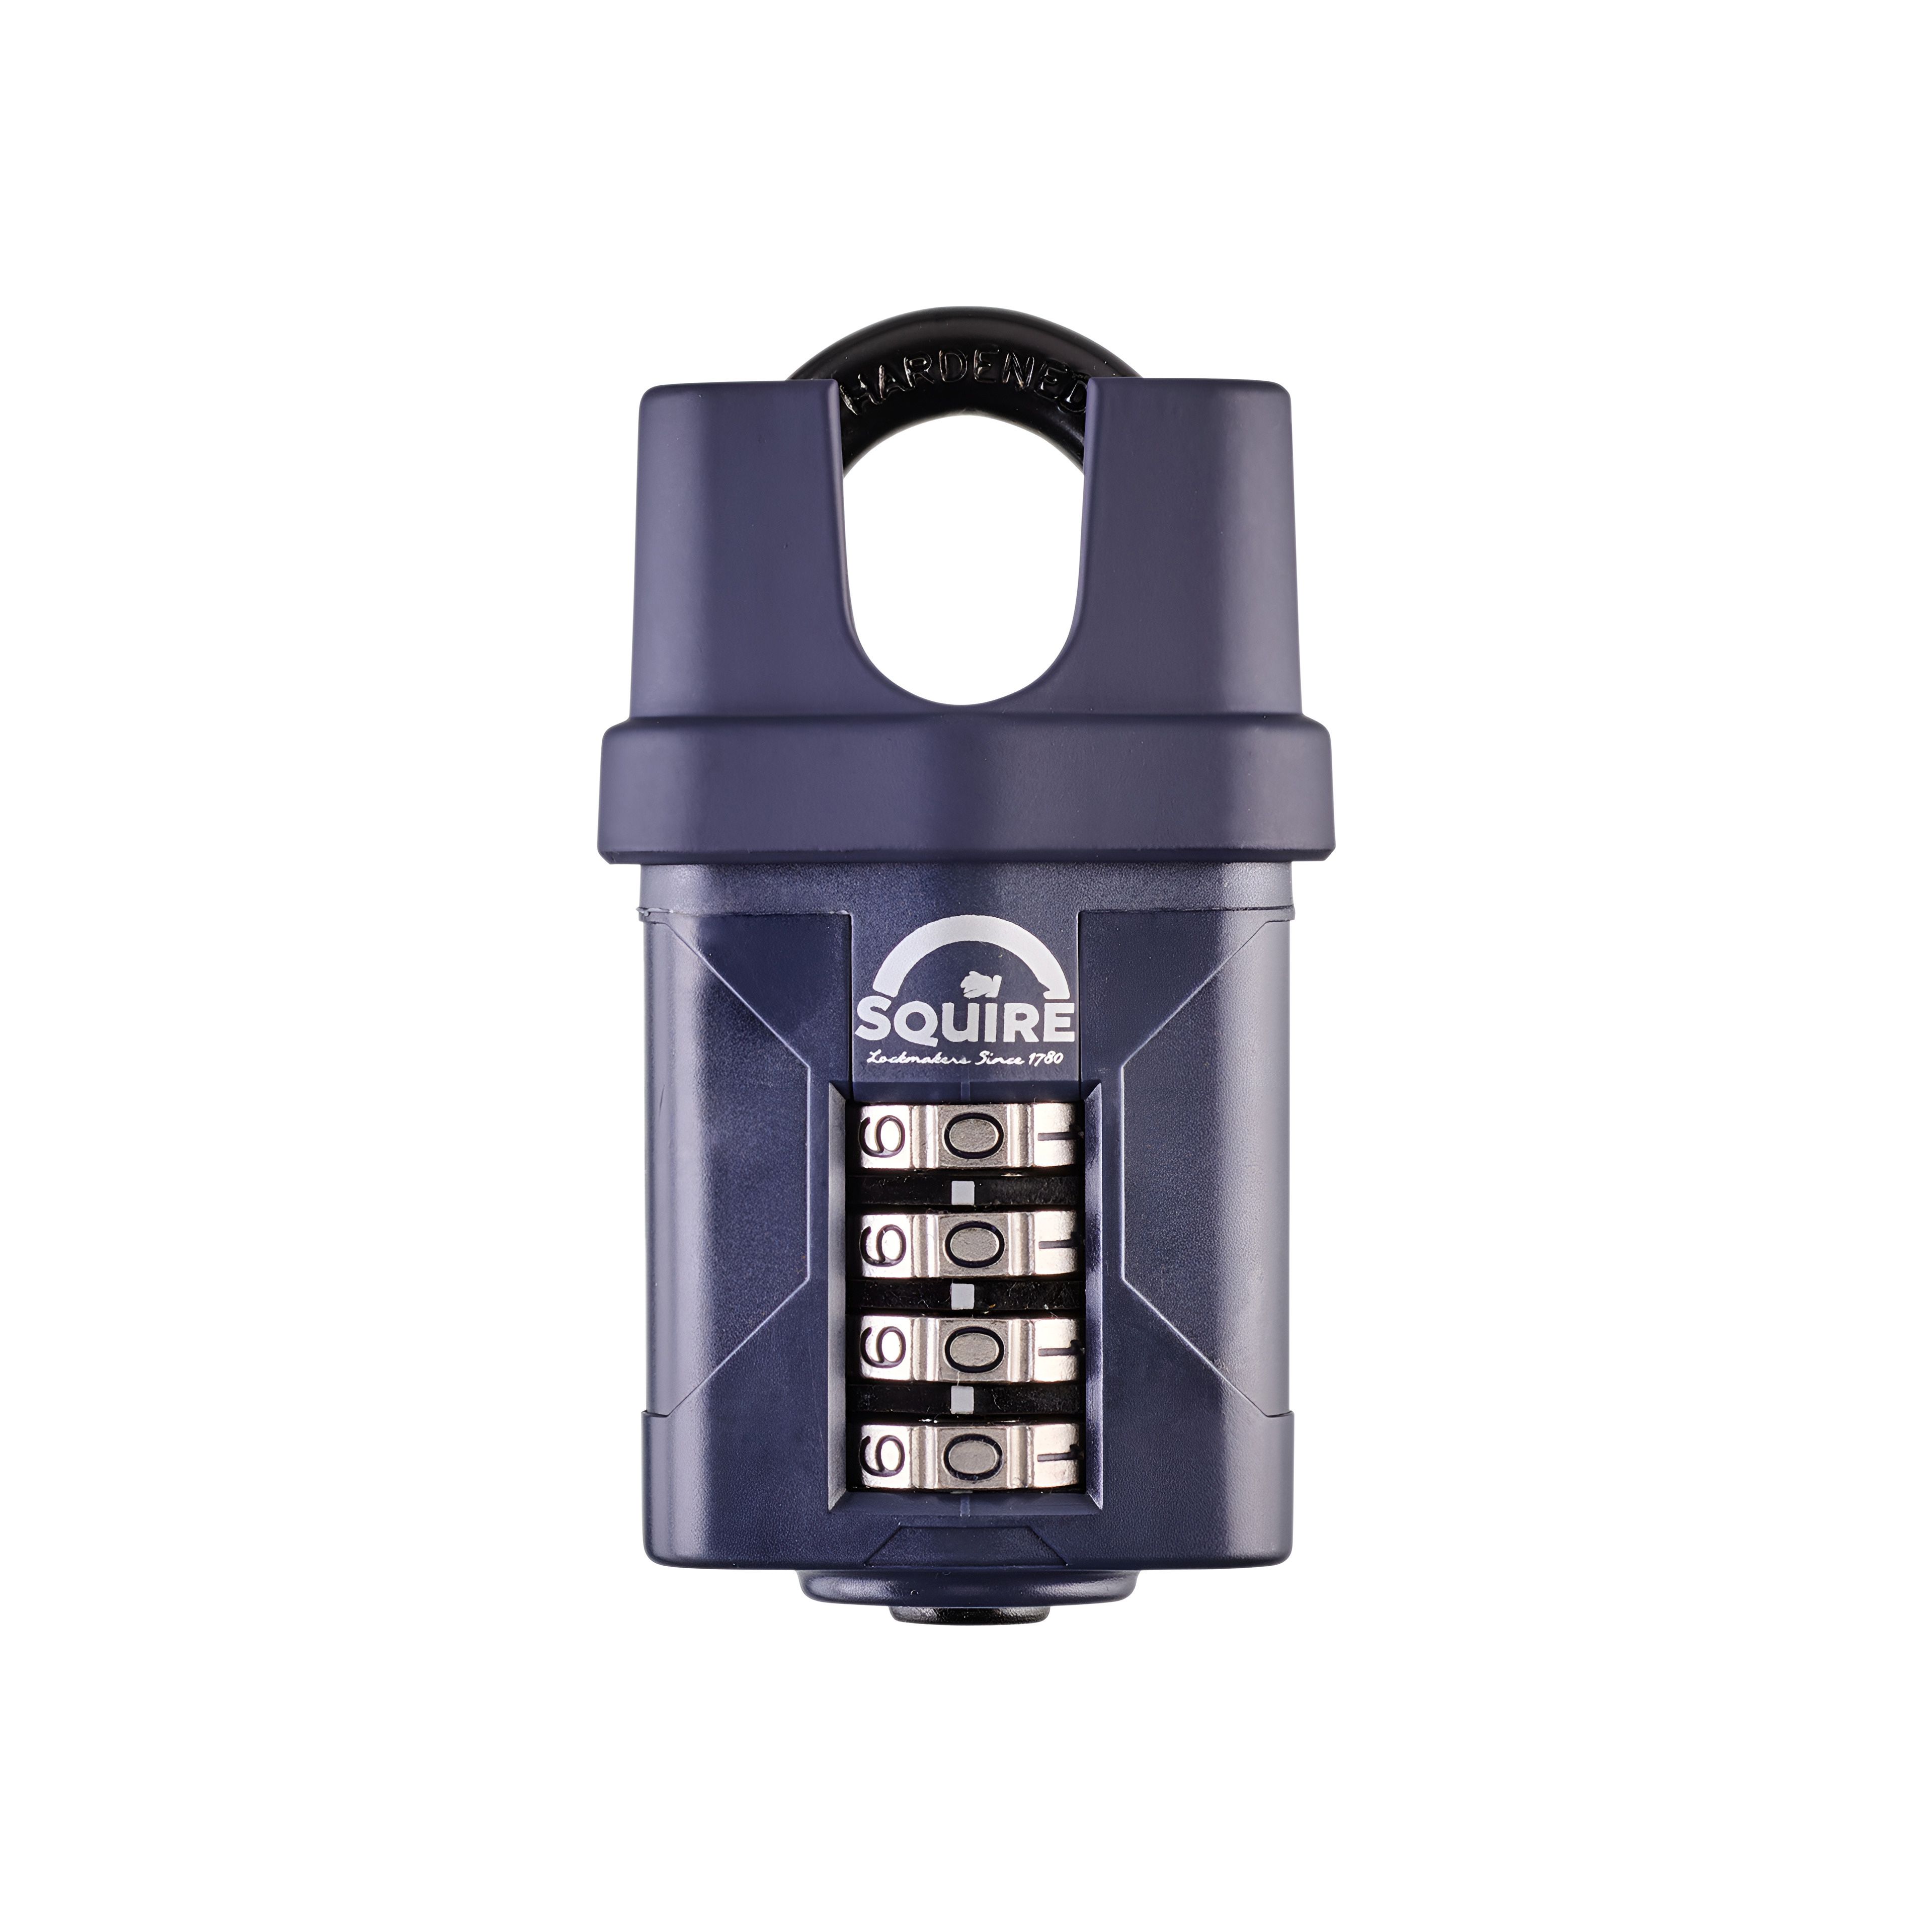 Squire Blue Steel Combination Padlock (H)94mm (W)52mm